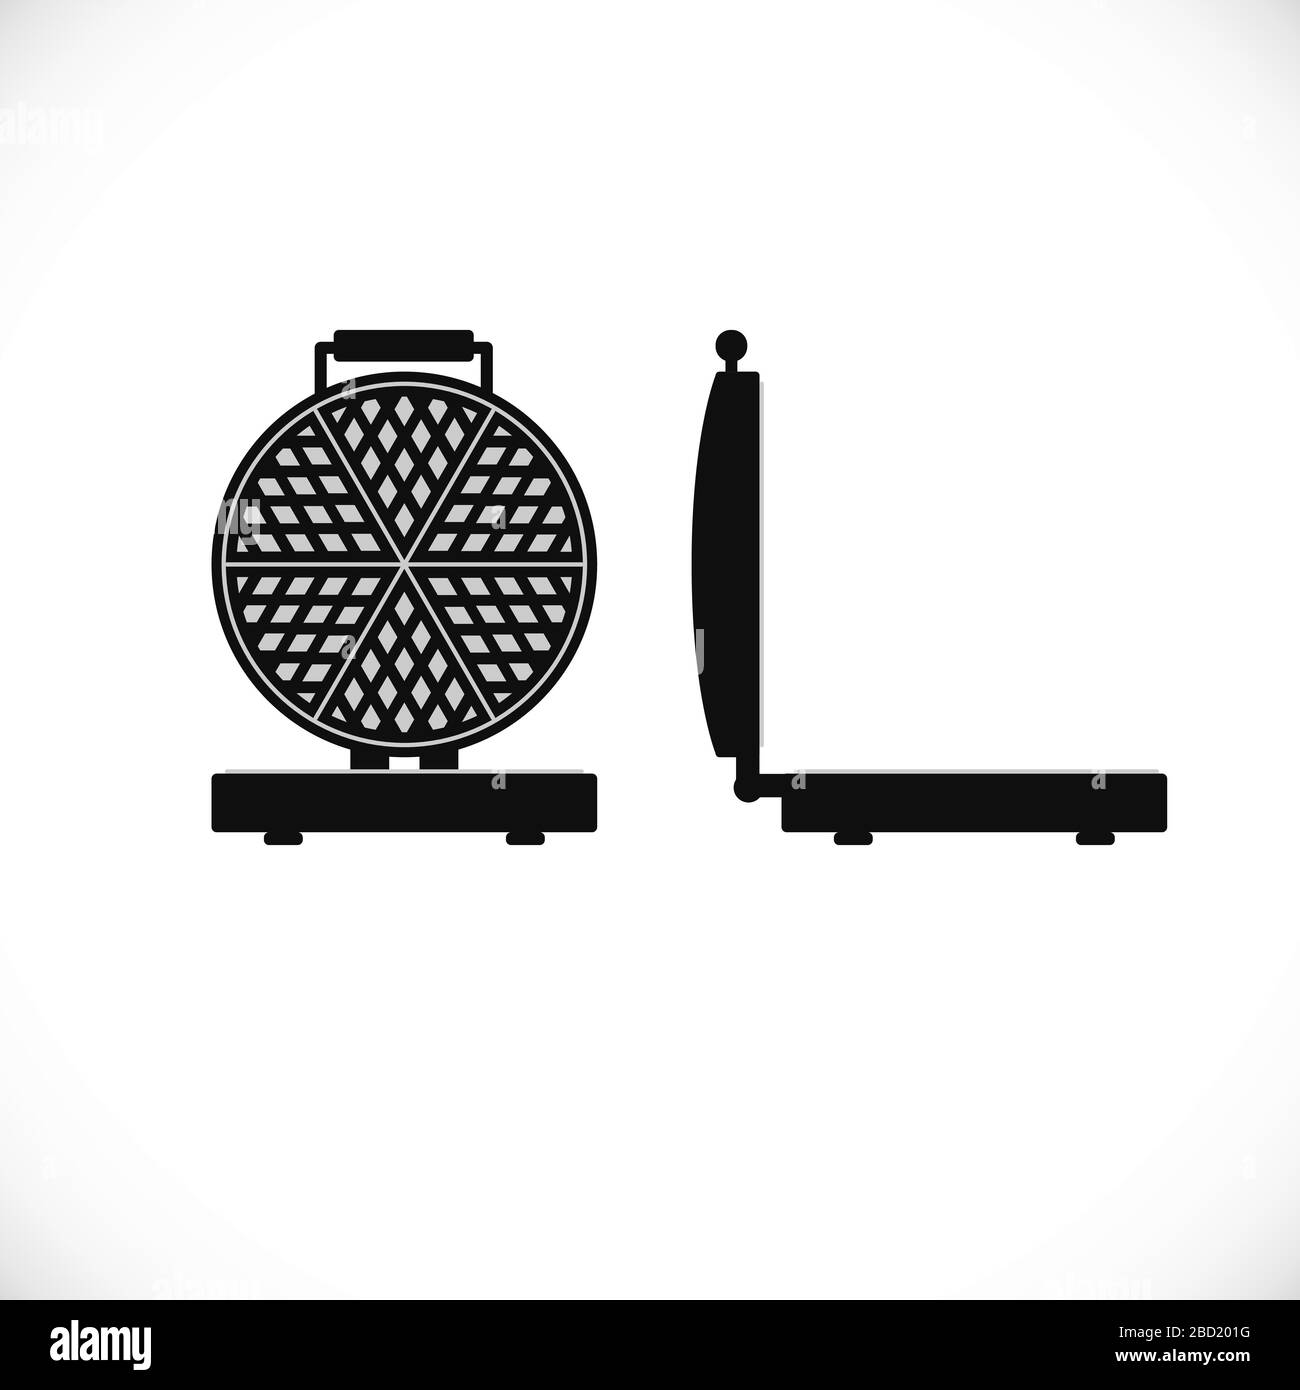 Waffle iron front and side view. Flat icon of appliance. Vector illustration Stock Vector